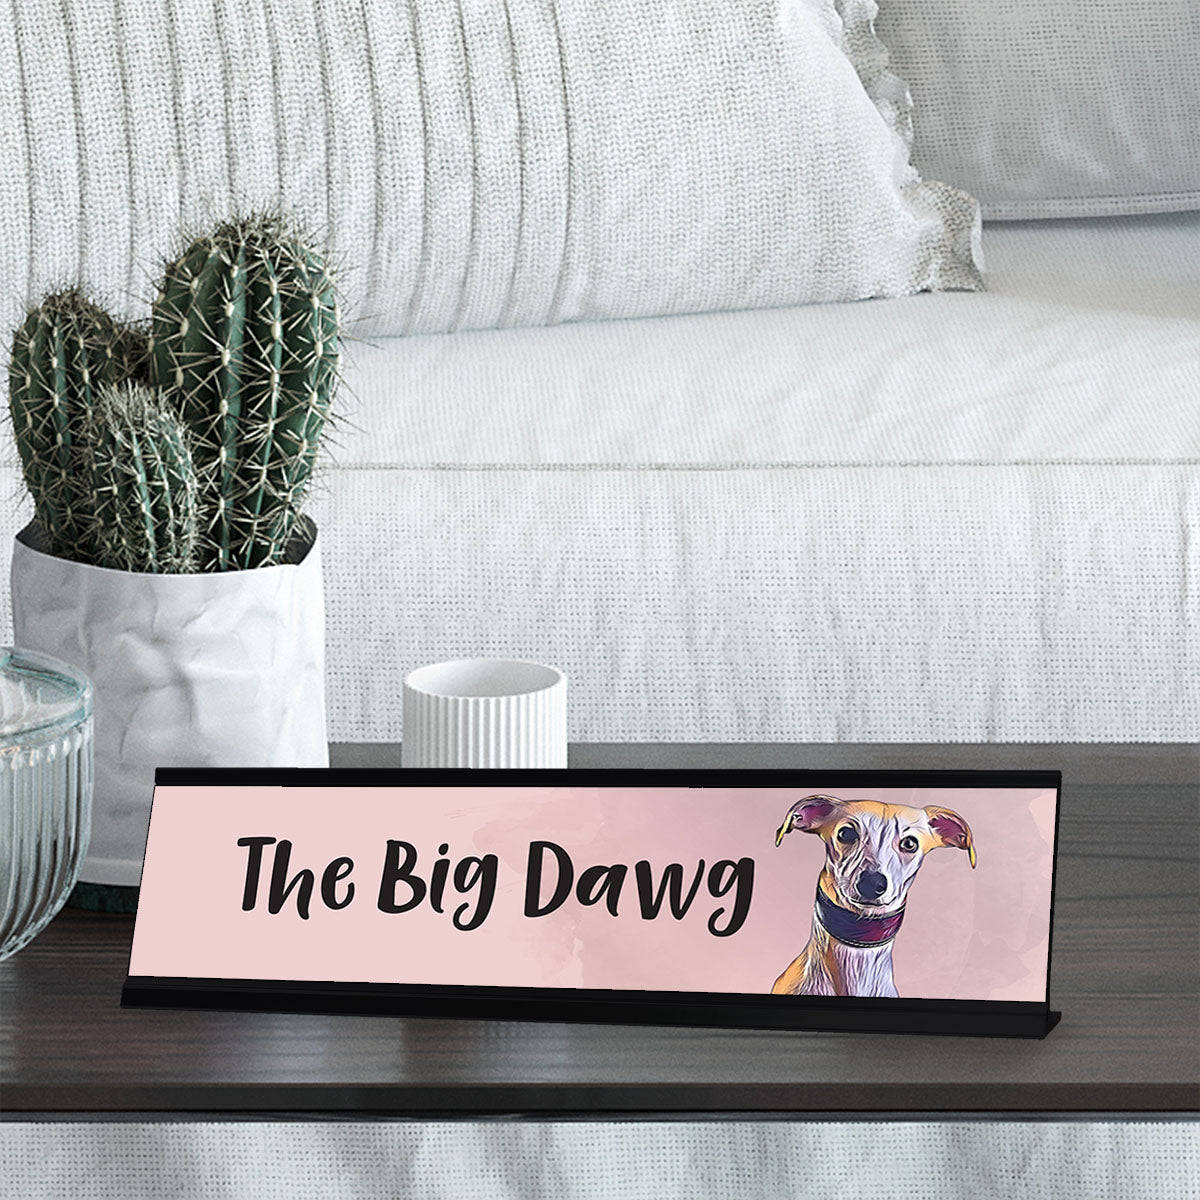 The Big Dawg Whippet, Gaucho Goods Desk Signs (2 x 8")